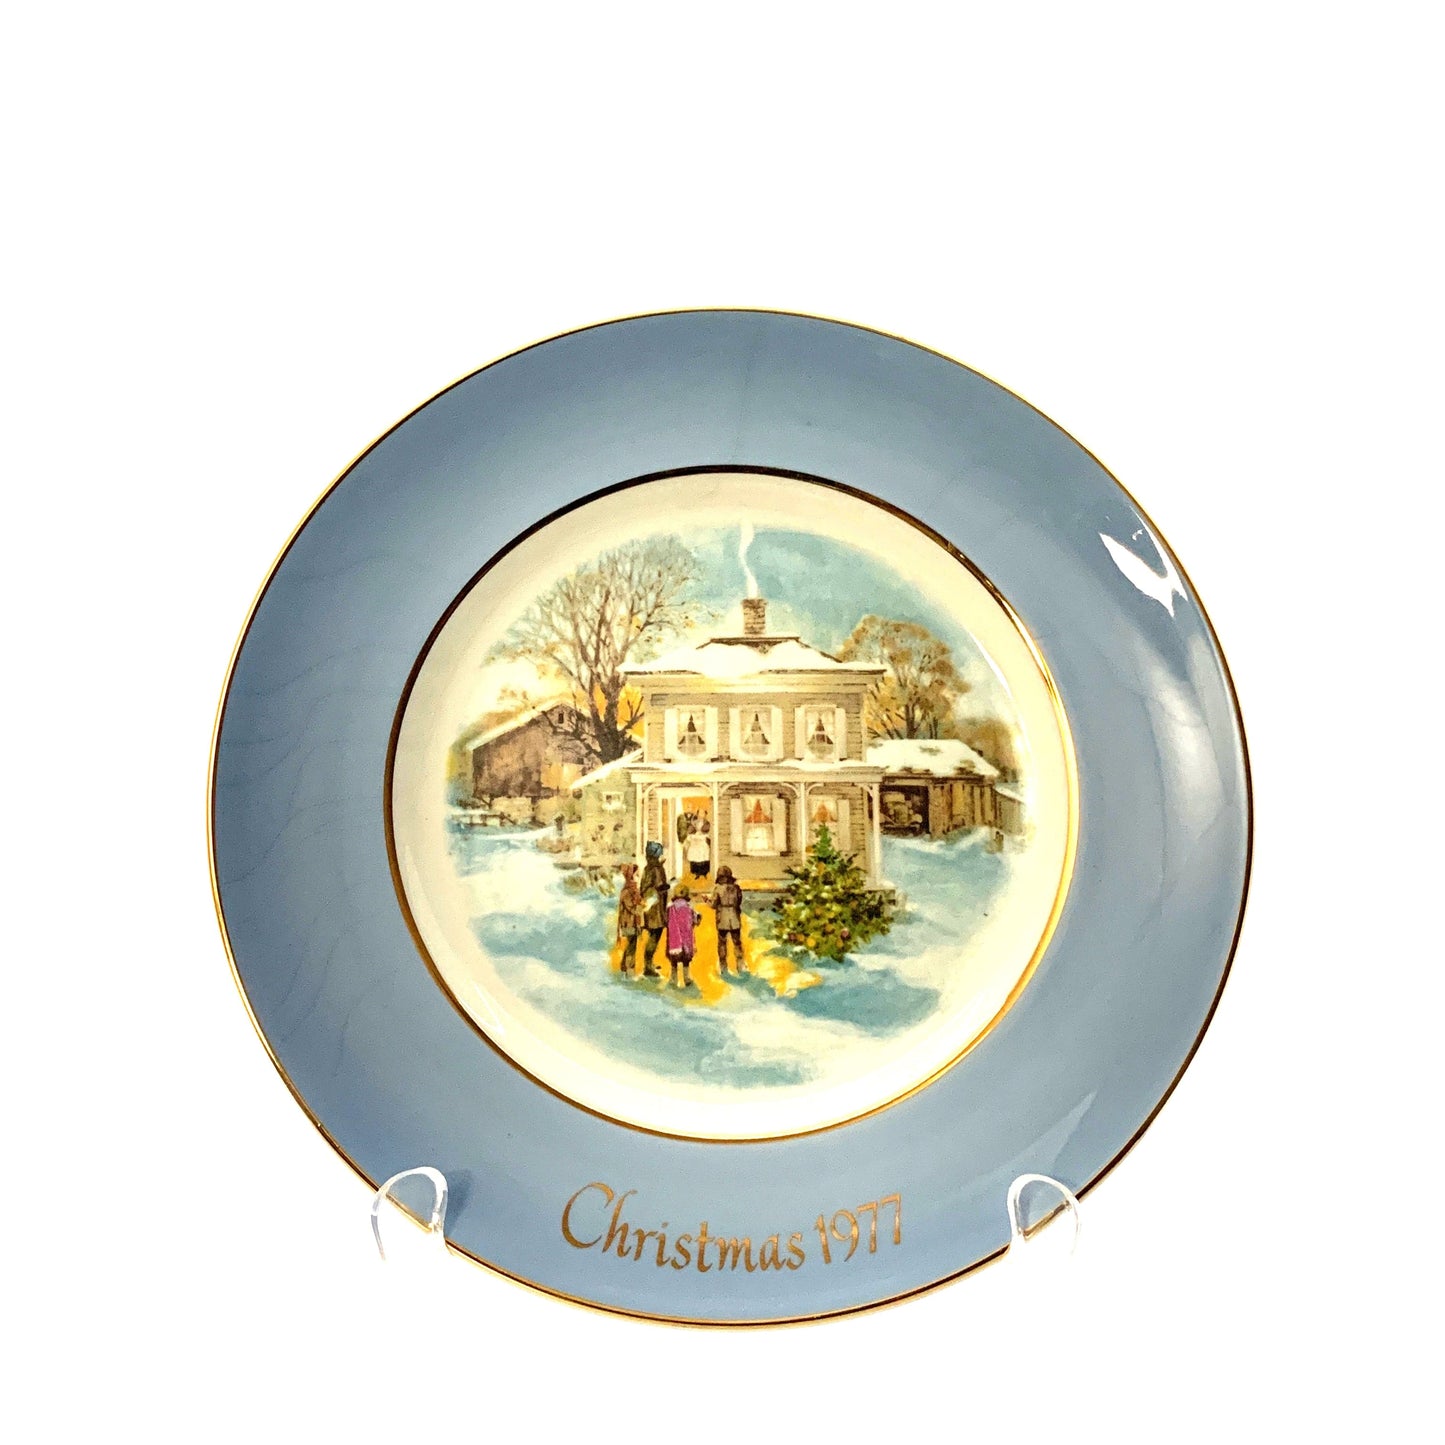 Vintage Avon Christmas Plate Series Fifth Edition “Carollers In The Slow” 1977